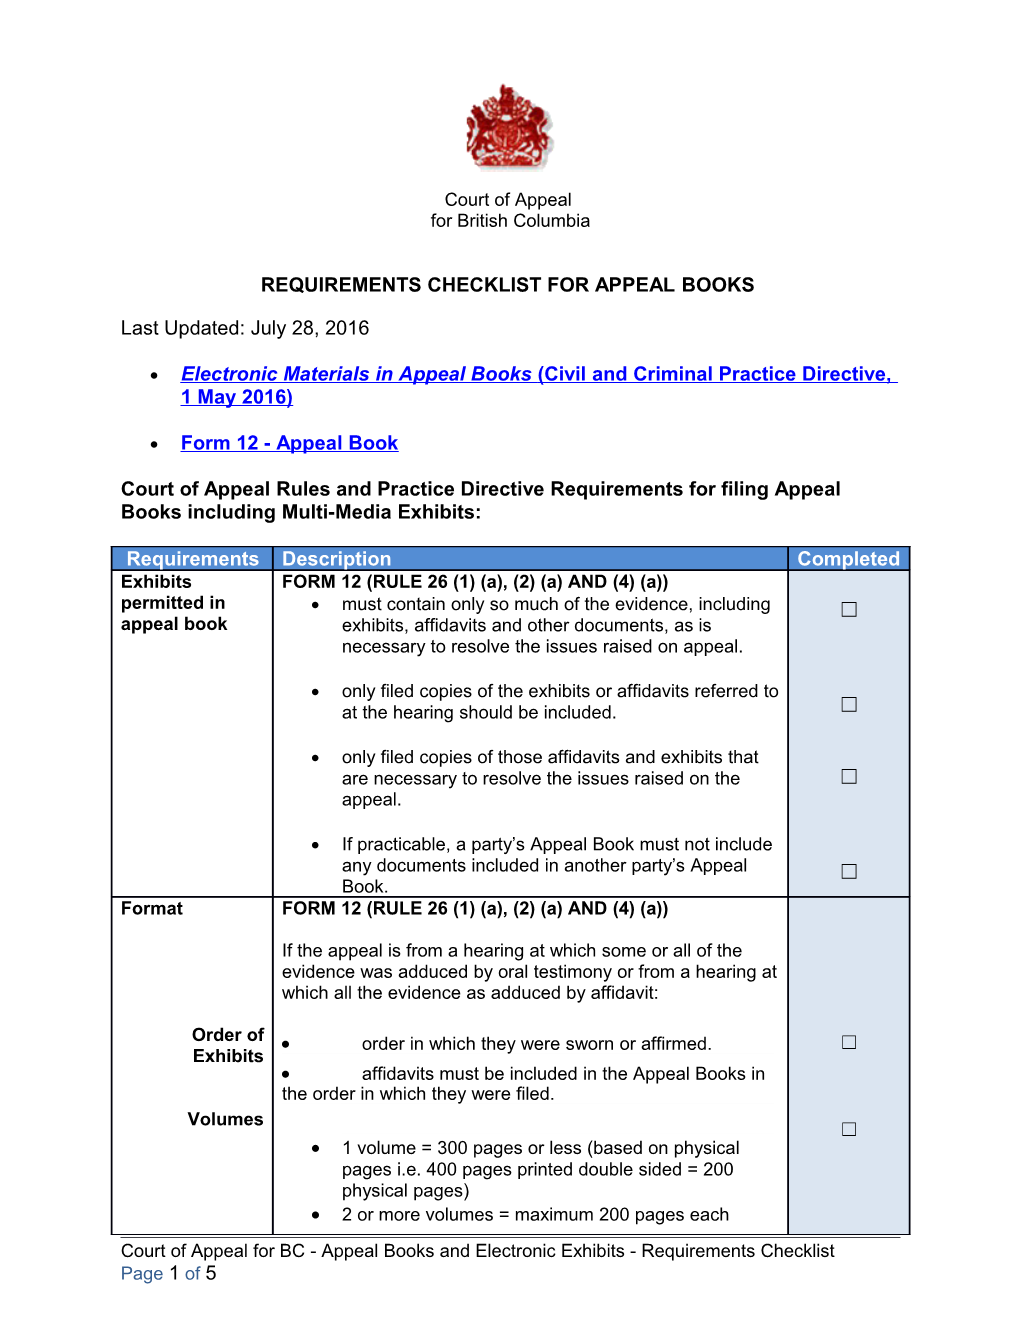 Court of Appeal for British Columbia REQUIREMENTS CHECKLIST for APPEAL BOOKS